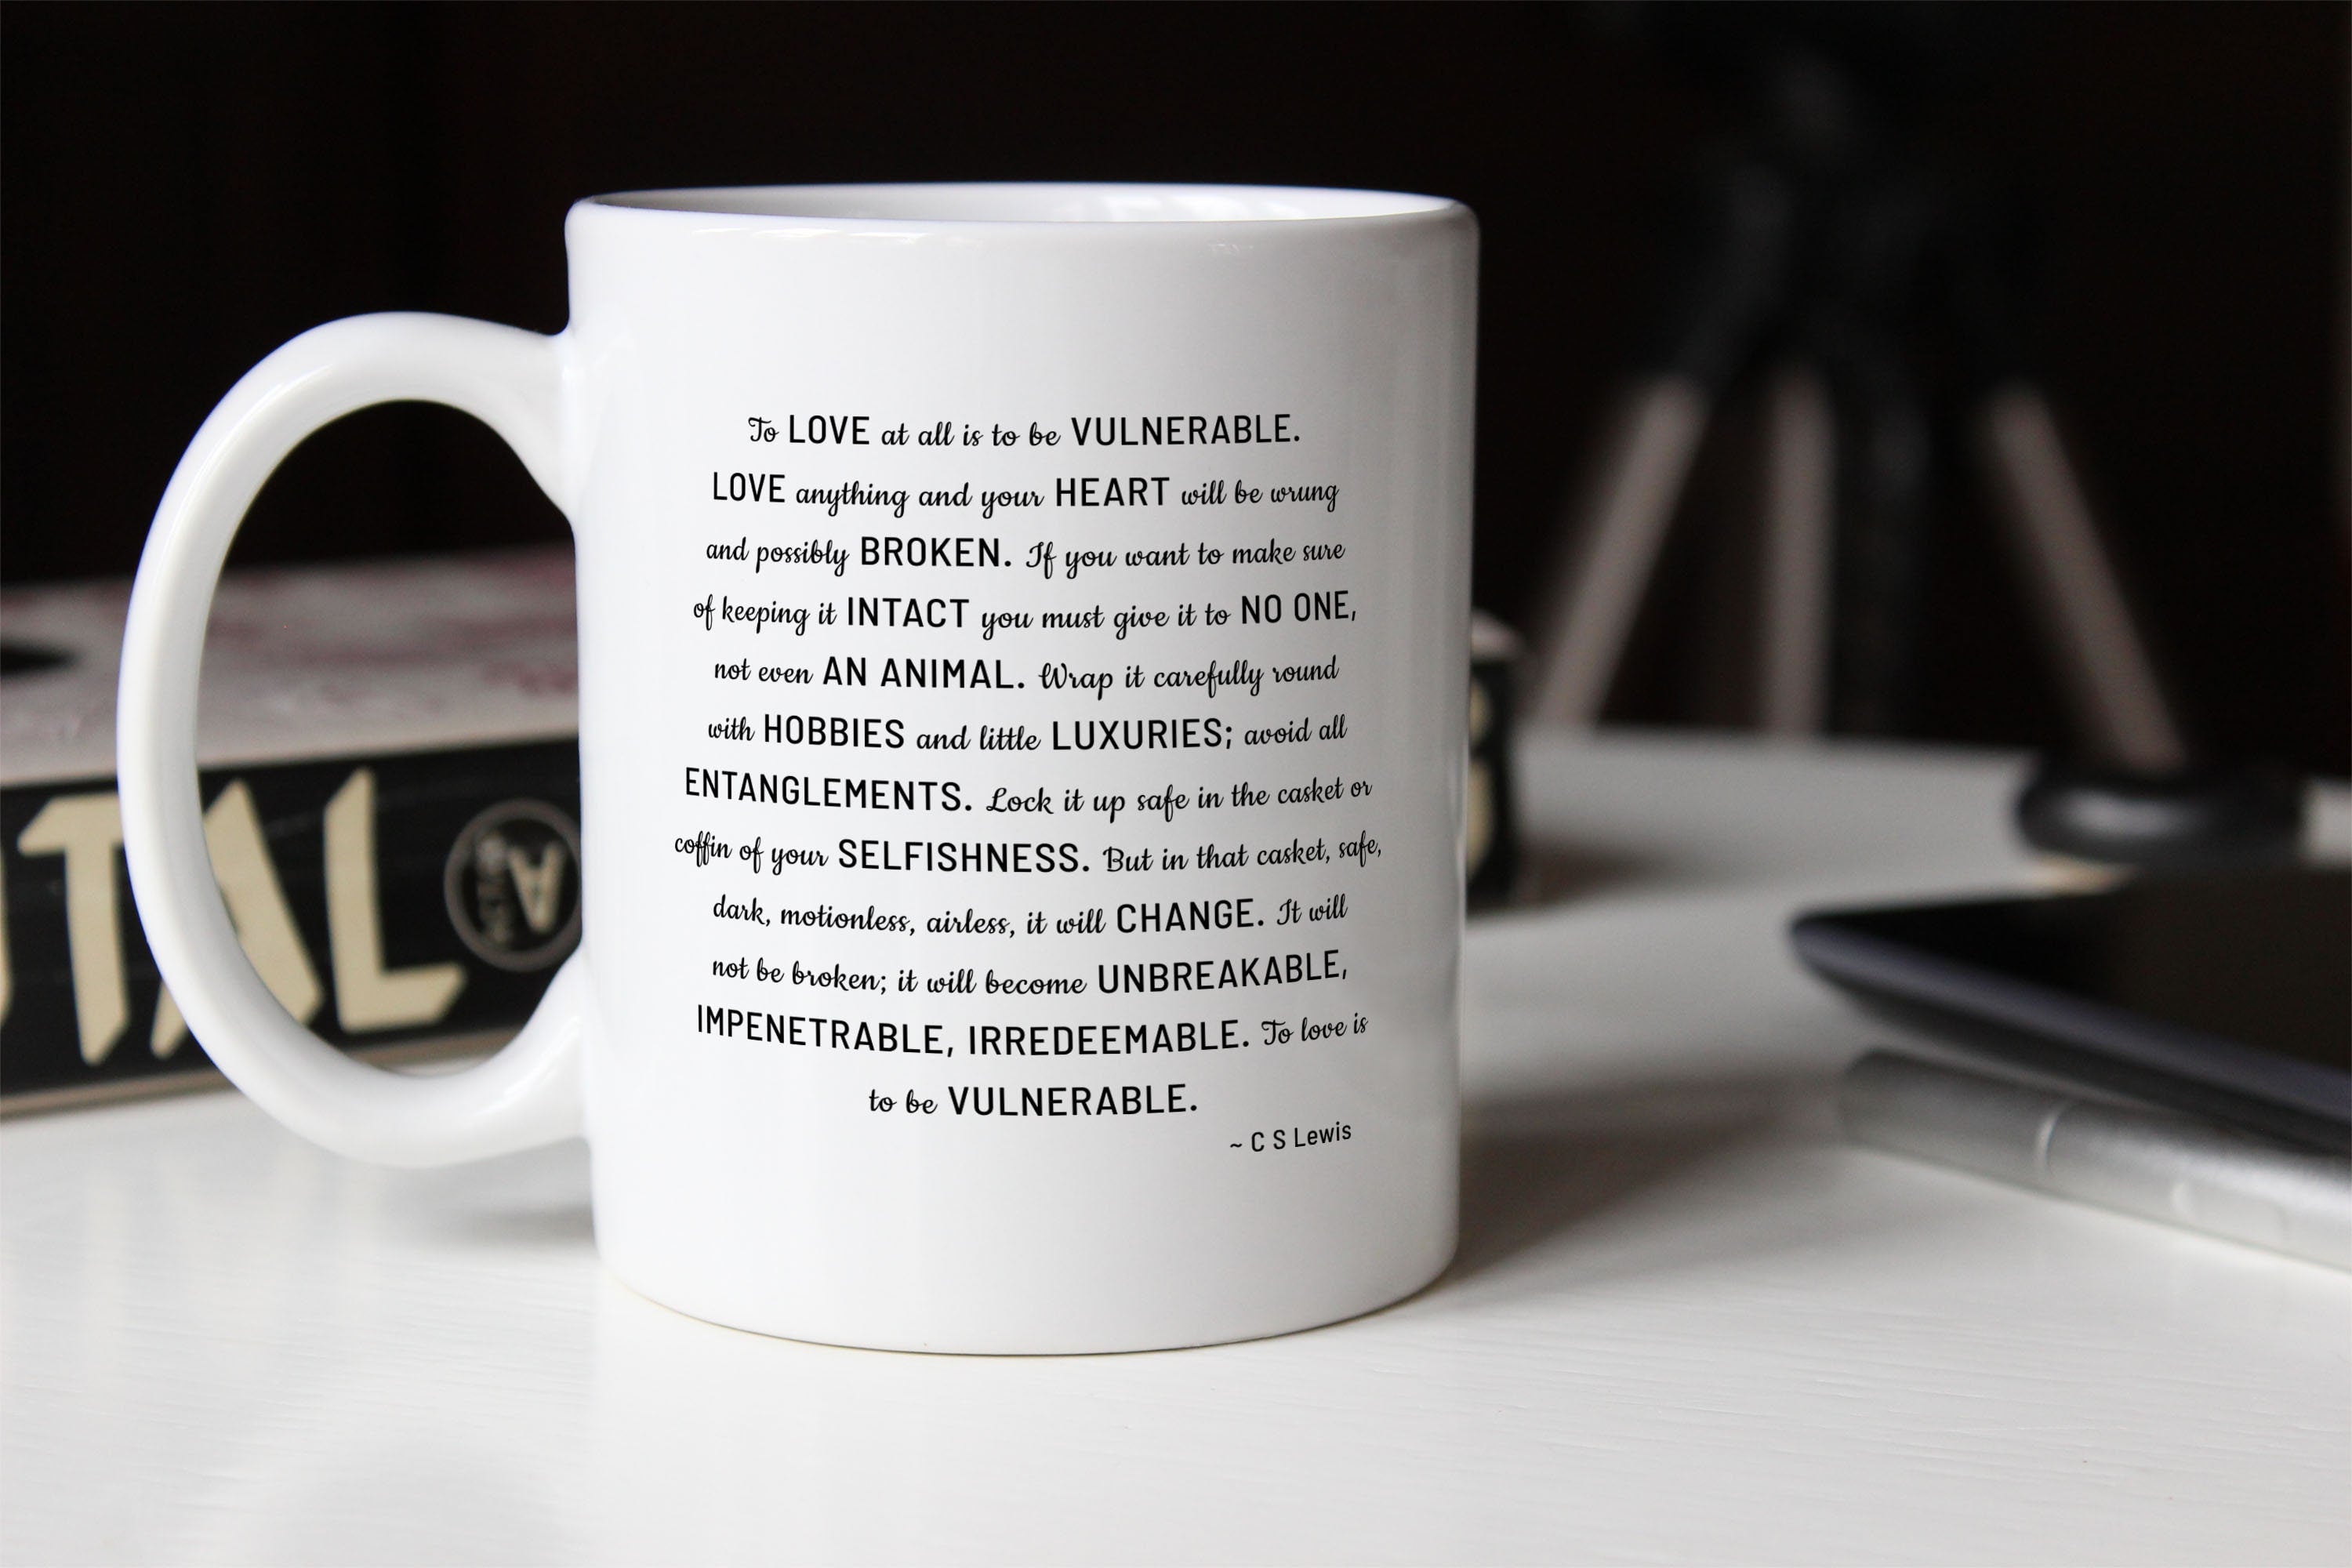 CS Lewis To Love Is To Be Vulnerable, Unique Black Coffee Mug Gift For Her